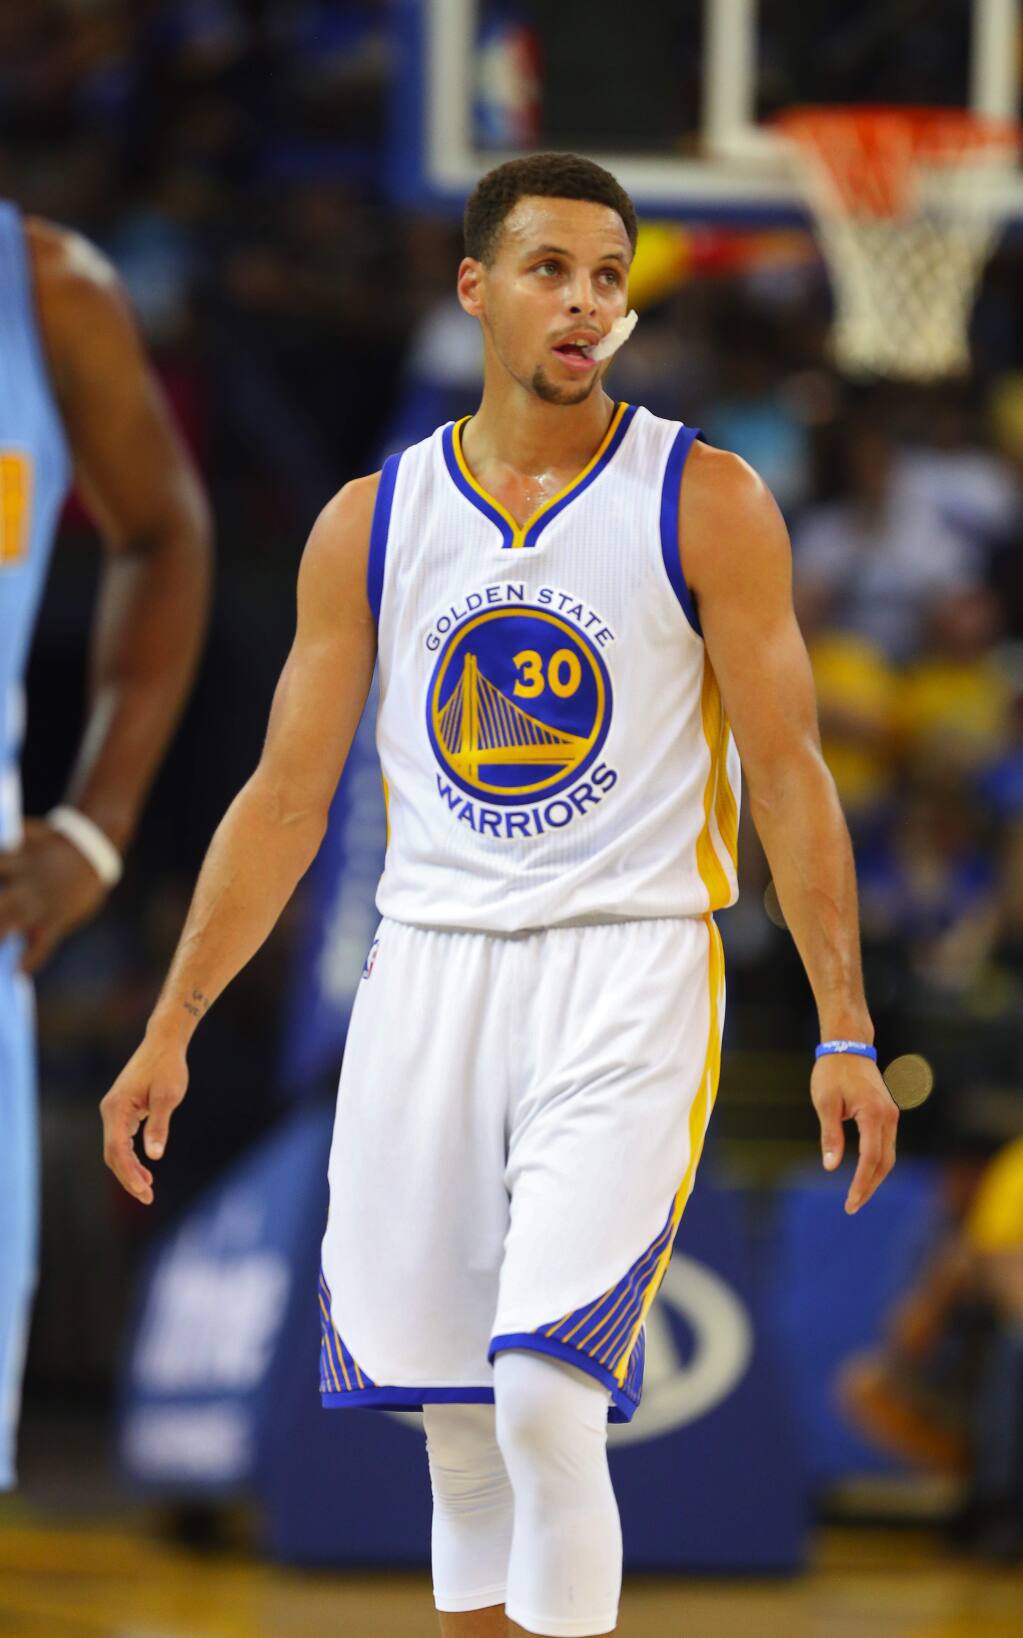 Stephen Curry's Davidson jersey won't be retired - yet